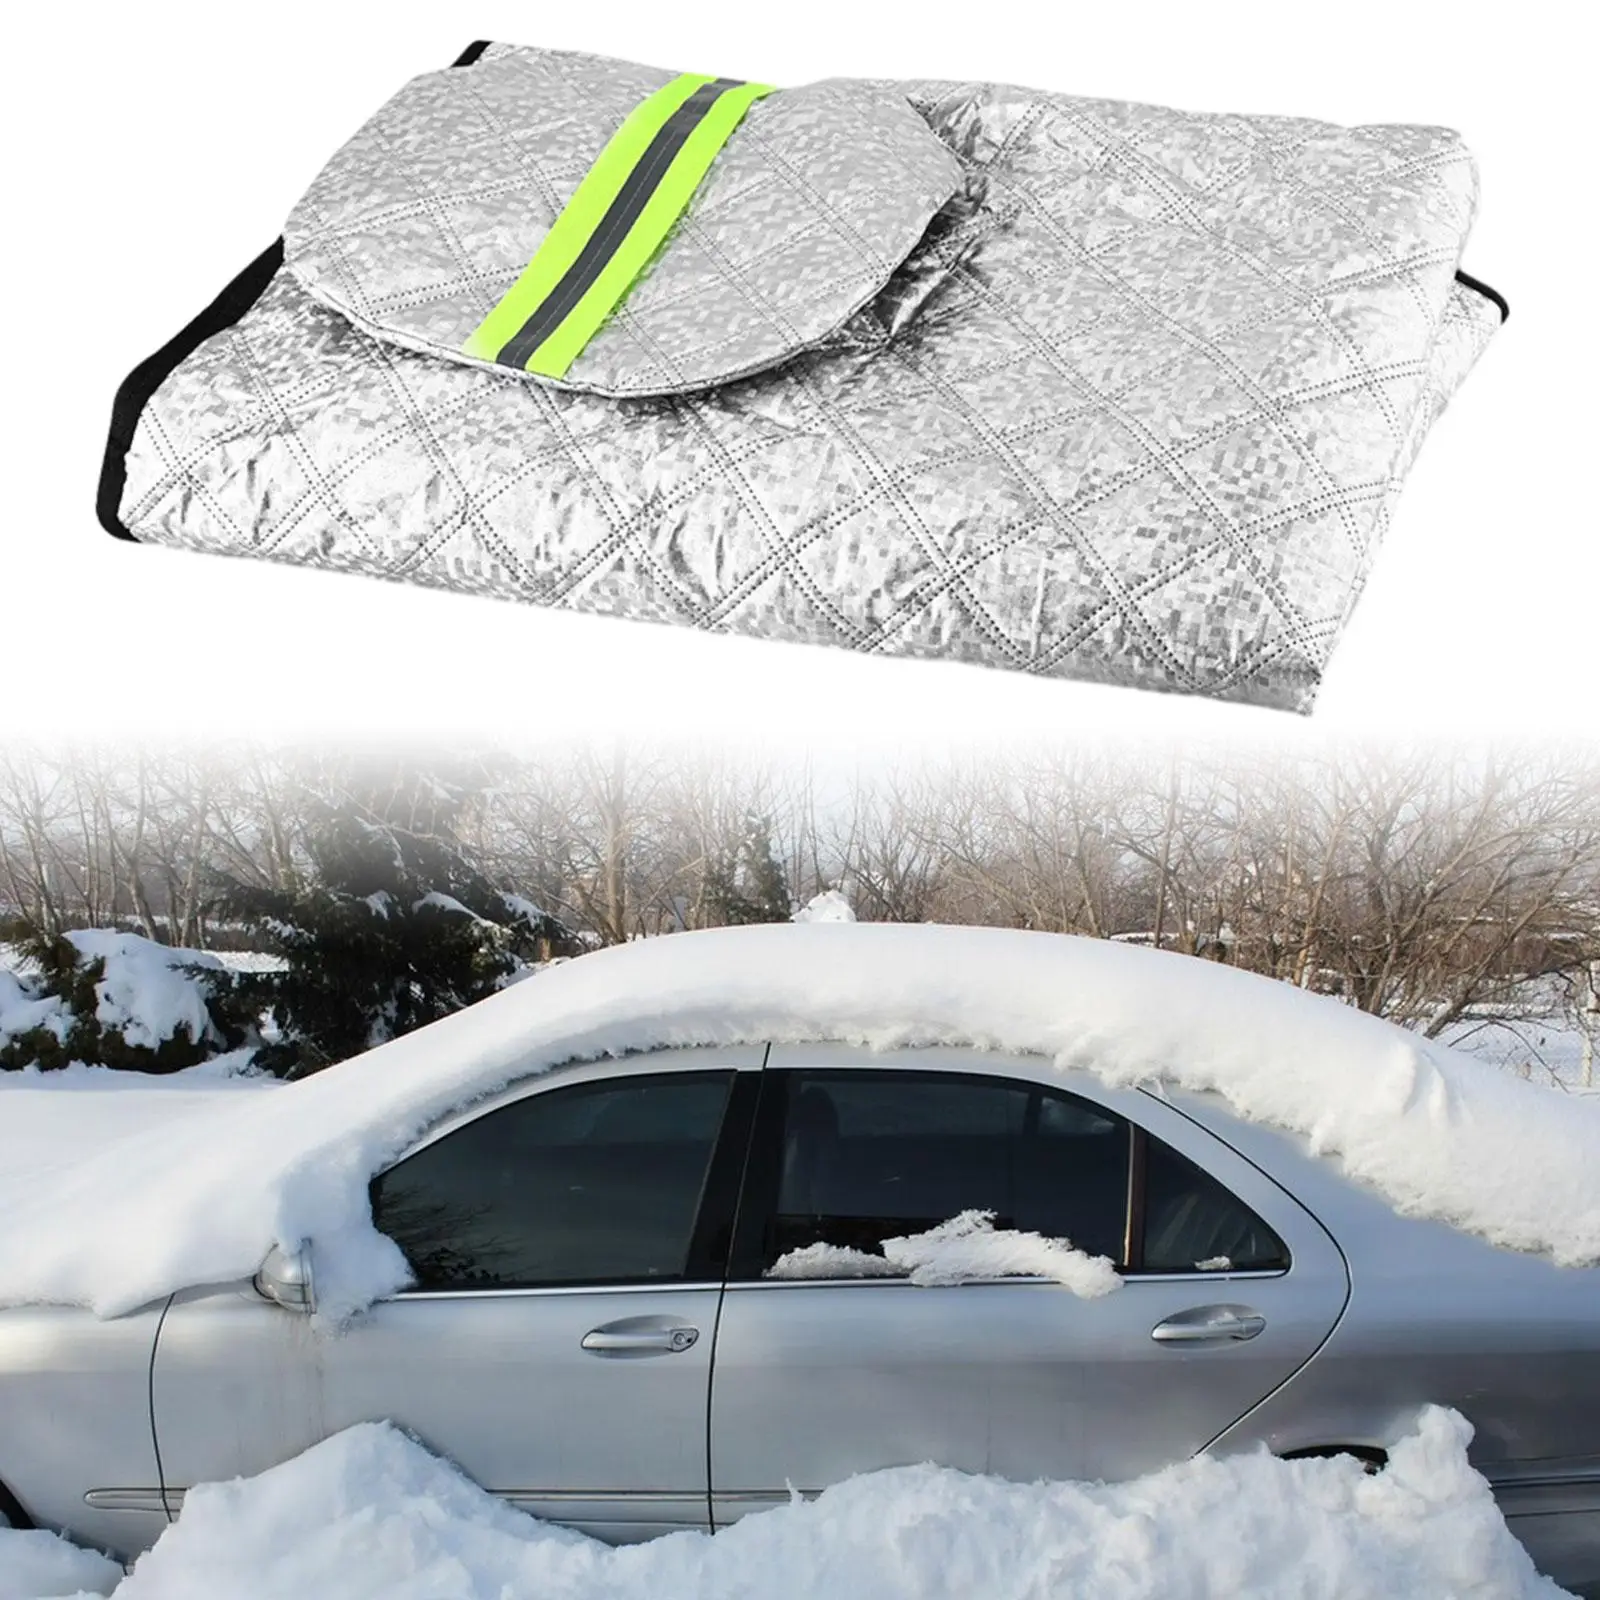 Car Windshield Snow Cover Mirror Protector Compact Aluminum Film Front Window Automotive Cover for Van Rvs Trucks Cars SUV